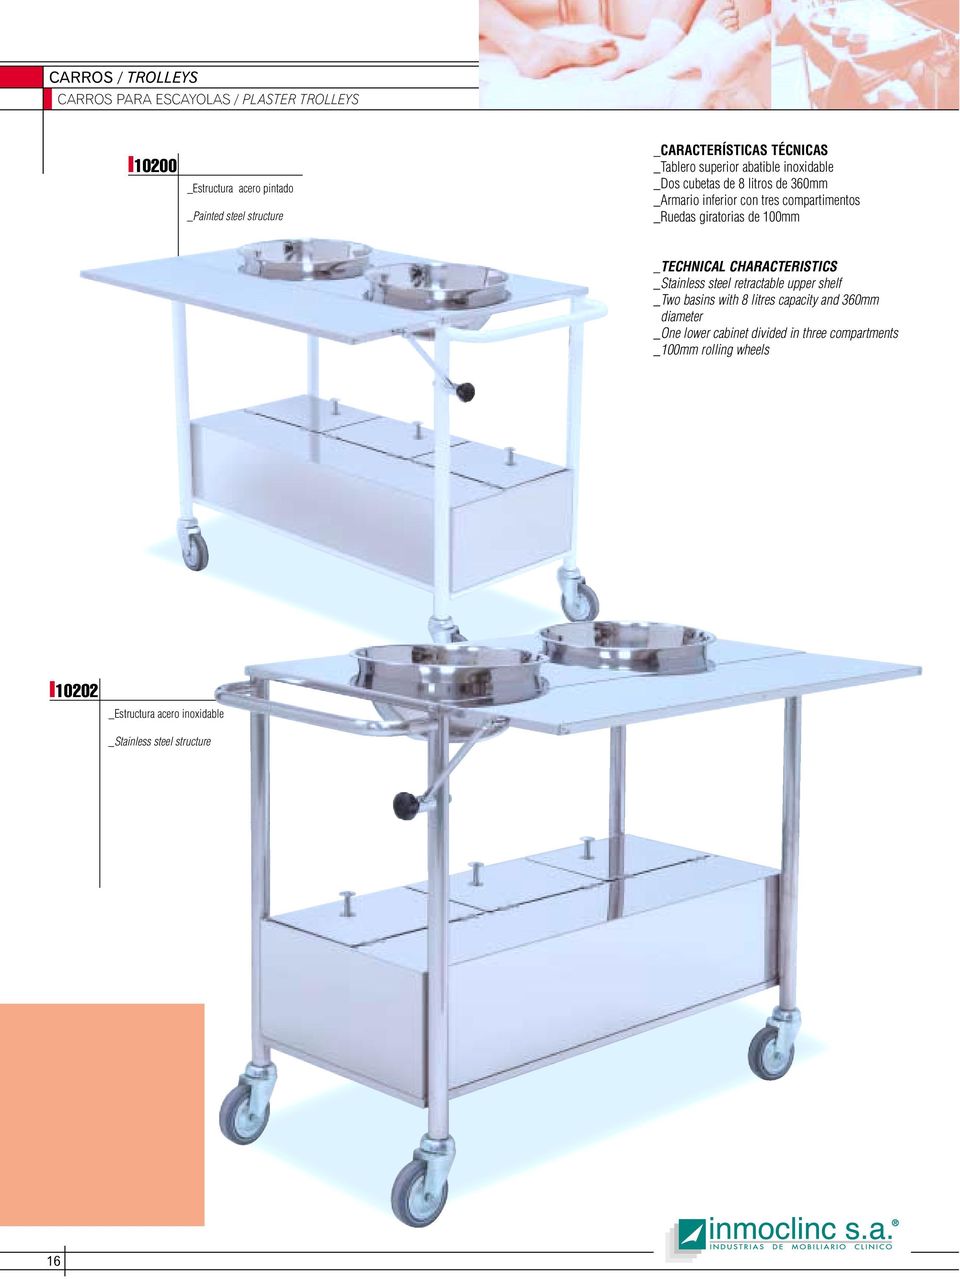 compartimentos _Stainless steel retractable upper shelf _Two basins with 8 litres